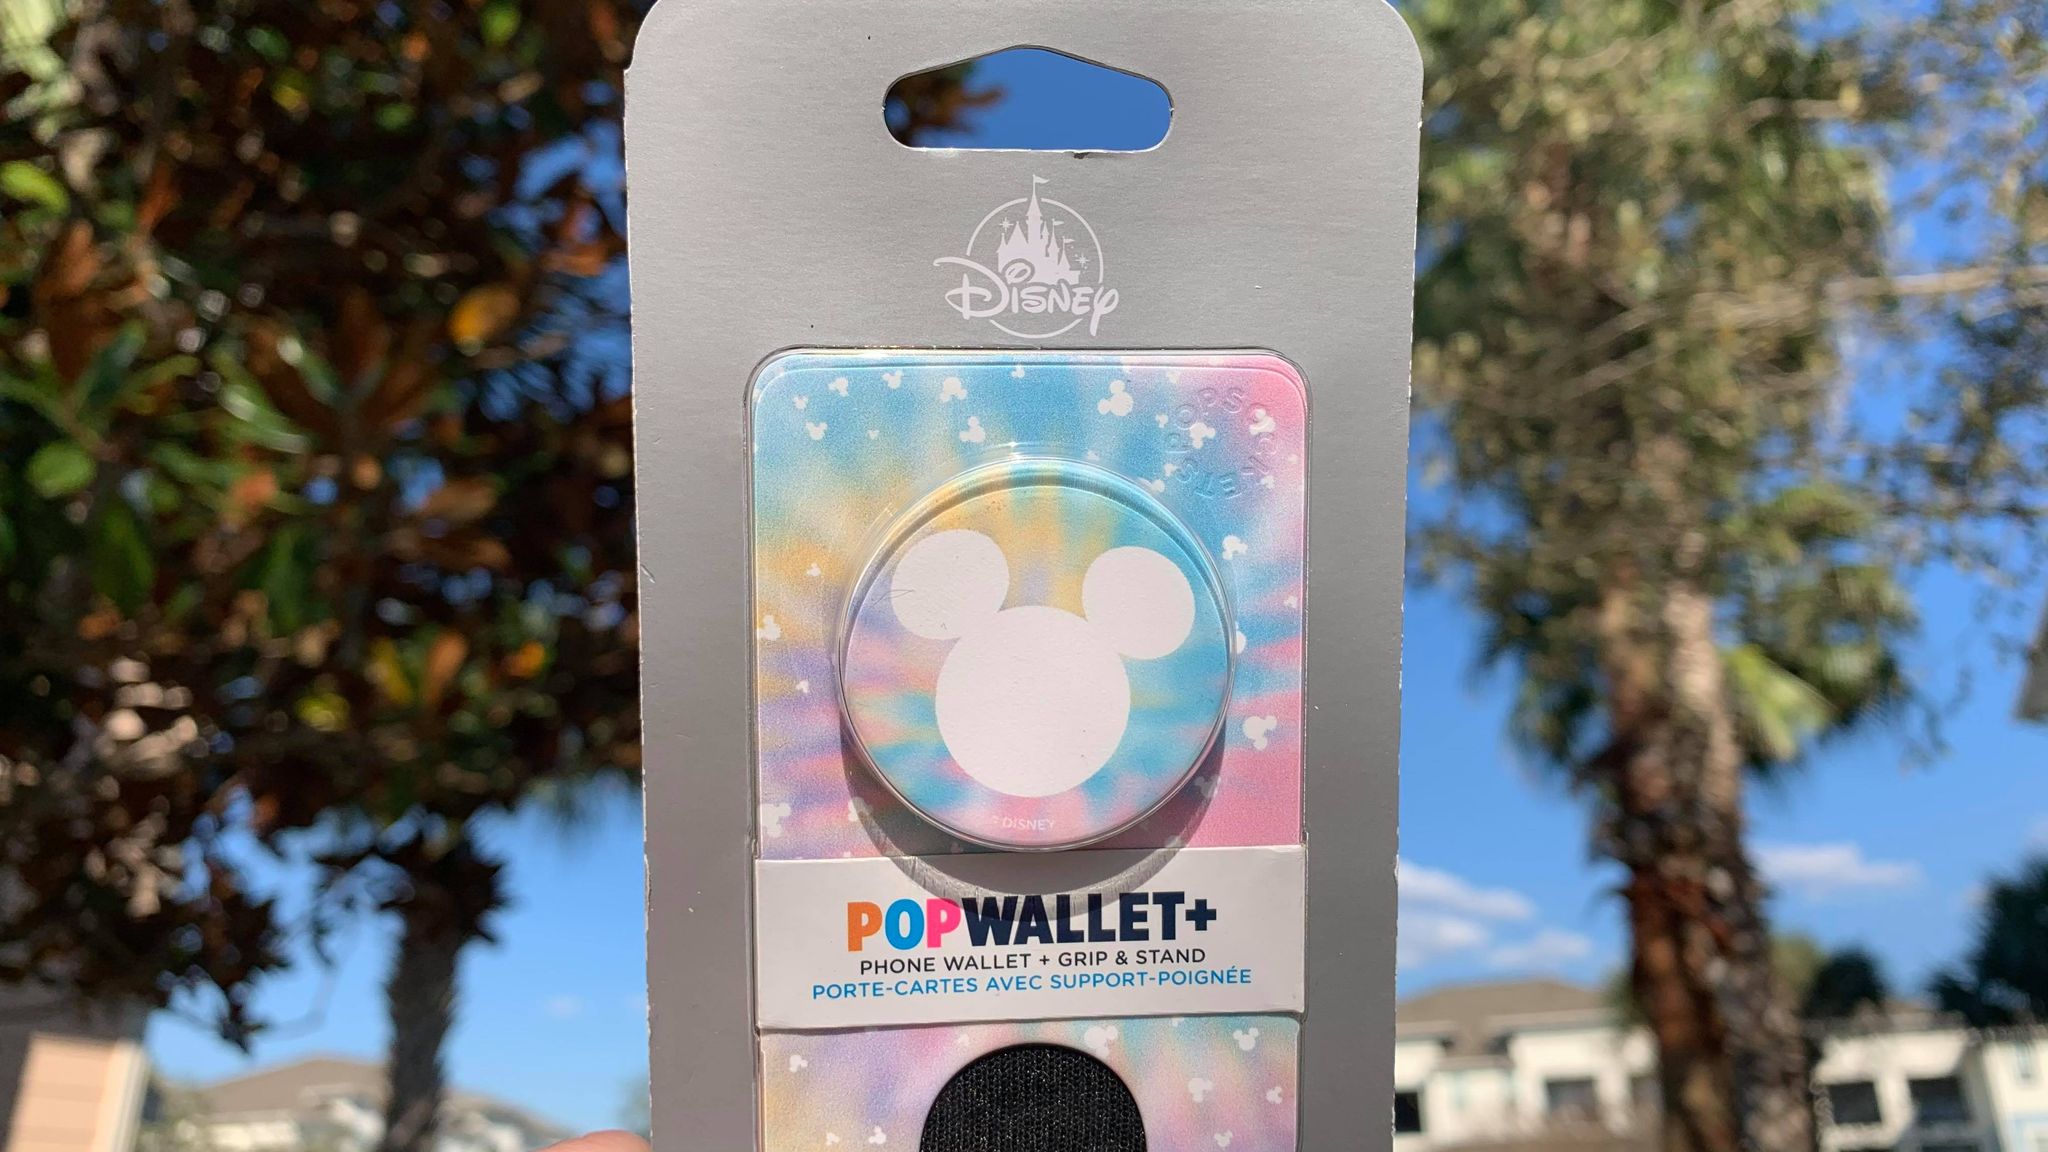 Adorable Disney PopWallets Spotted at the Magic Kingdom